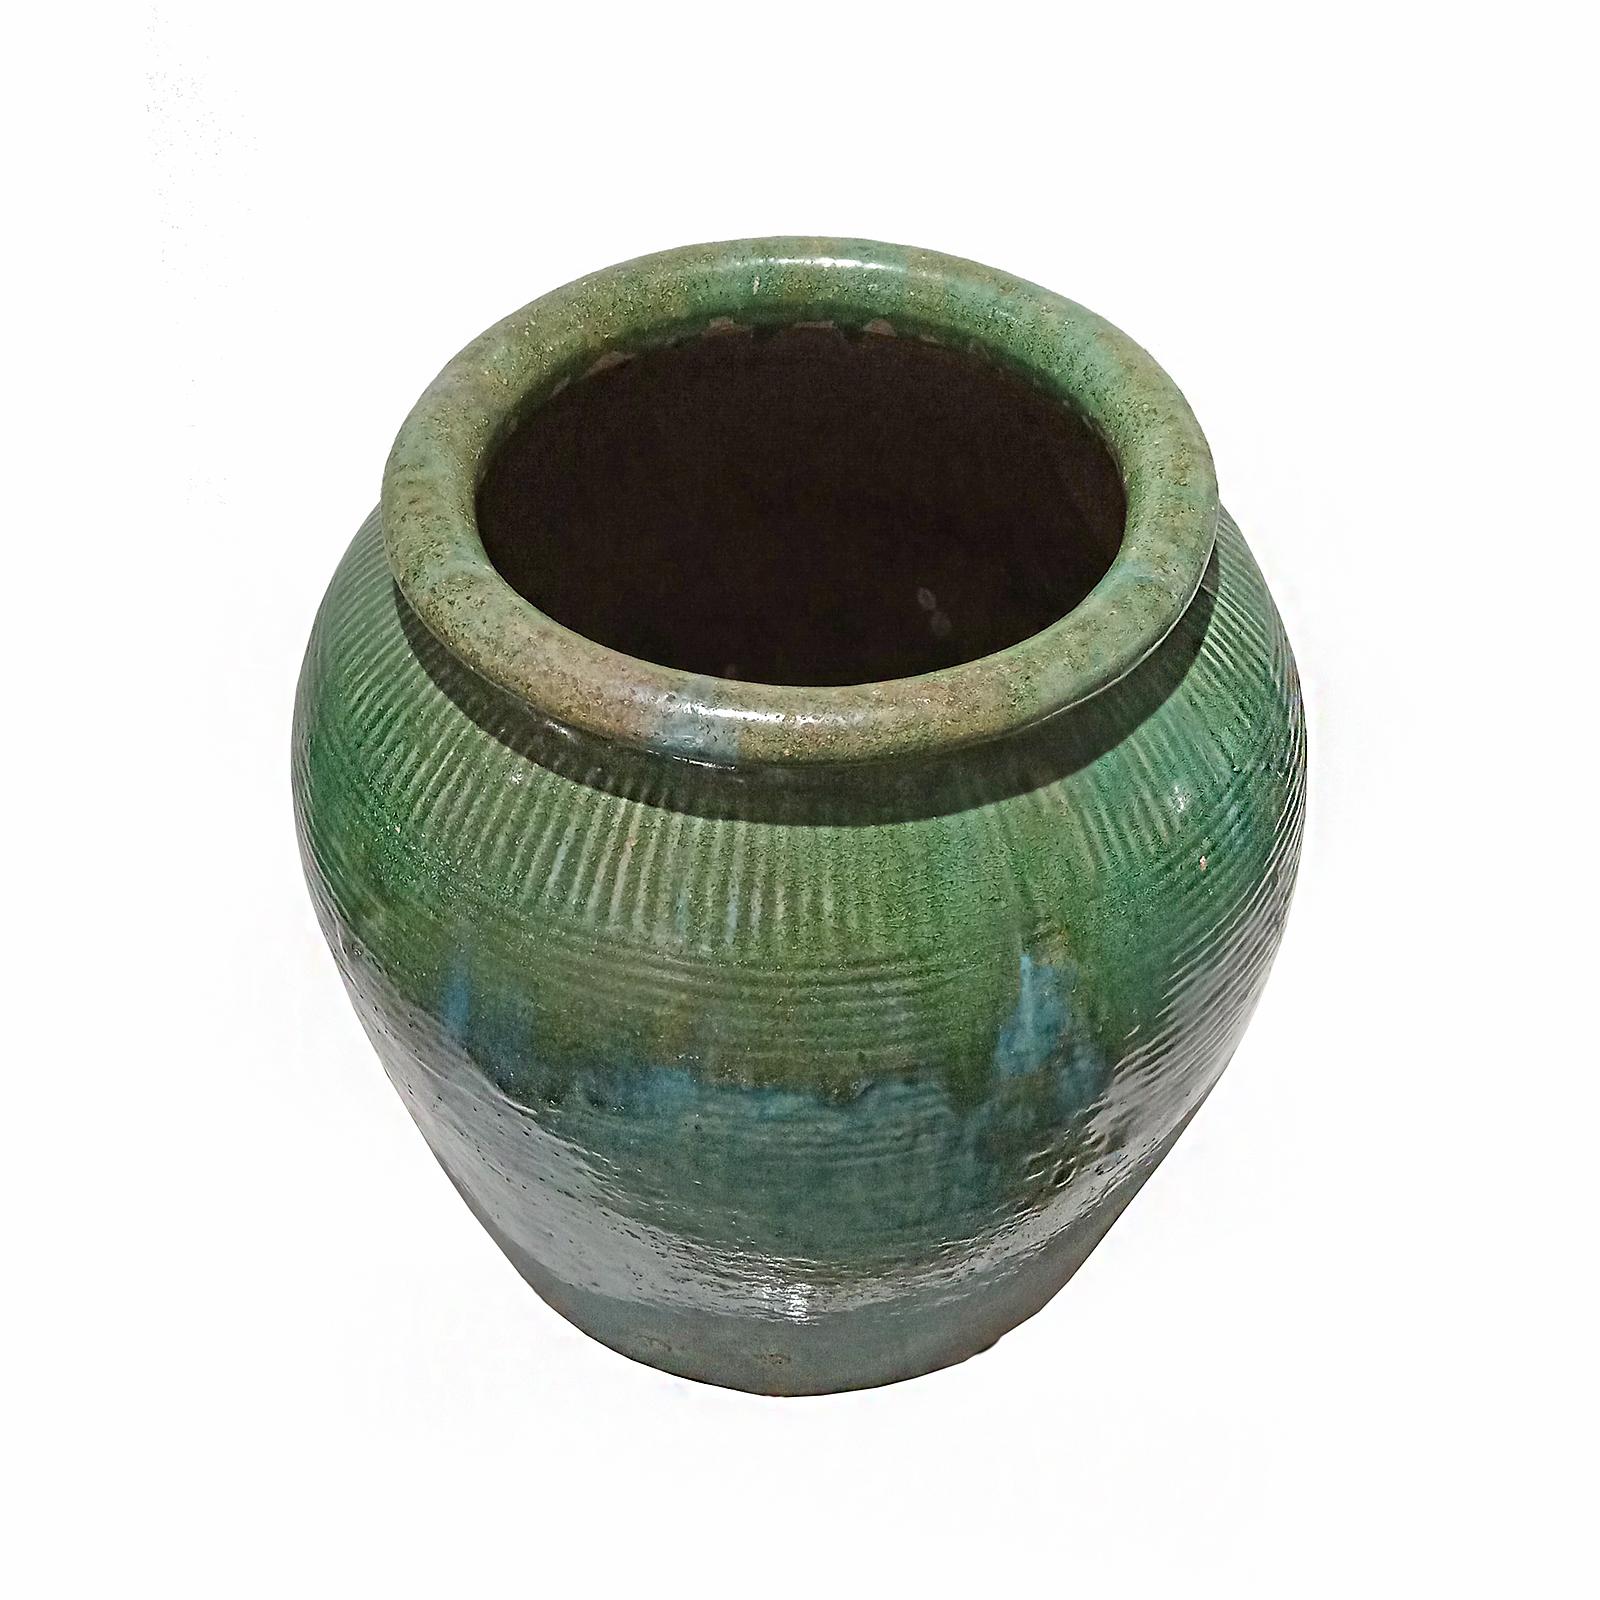 Balinese Terracotta Vase / Jar / Urn with Green Glaze, Contemporary For Sale 1